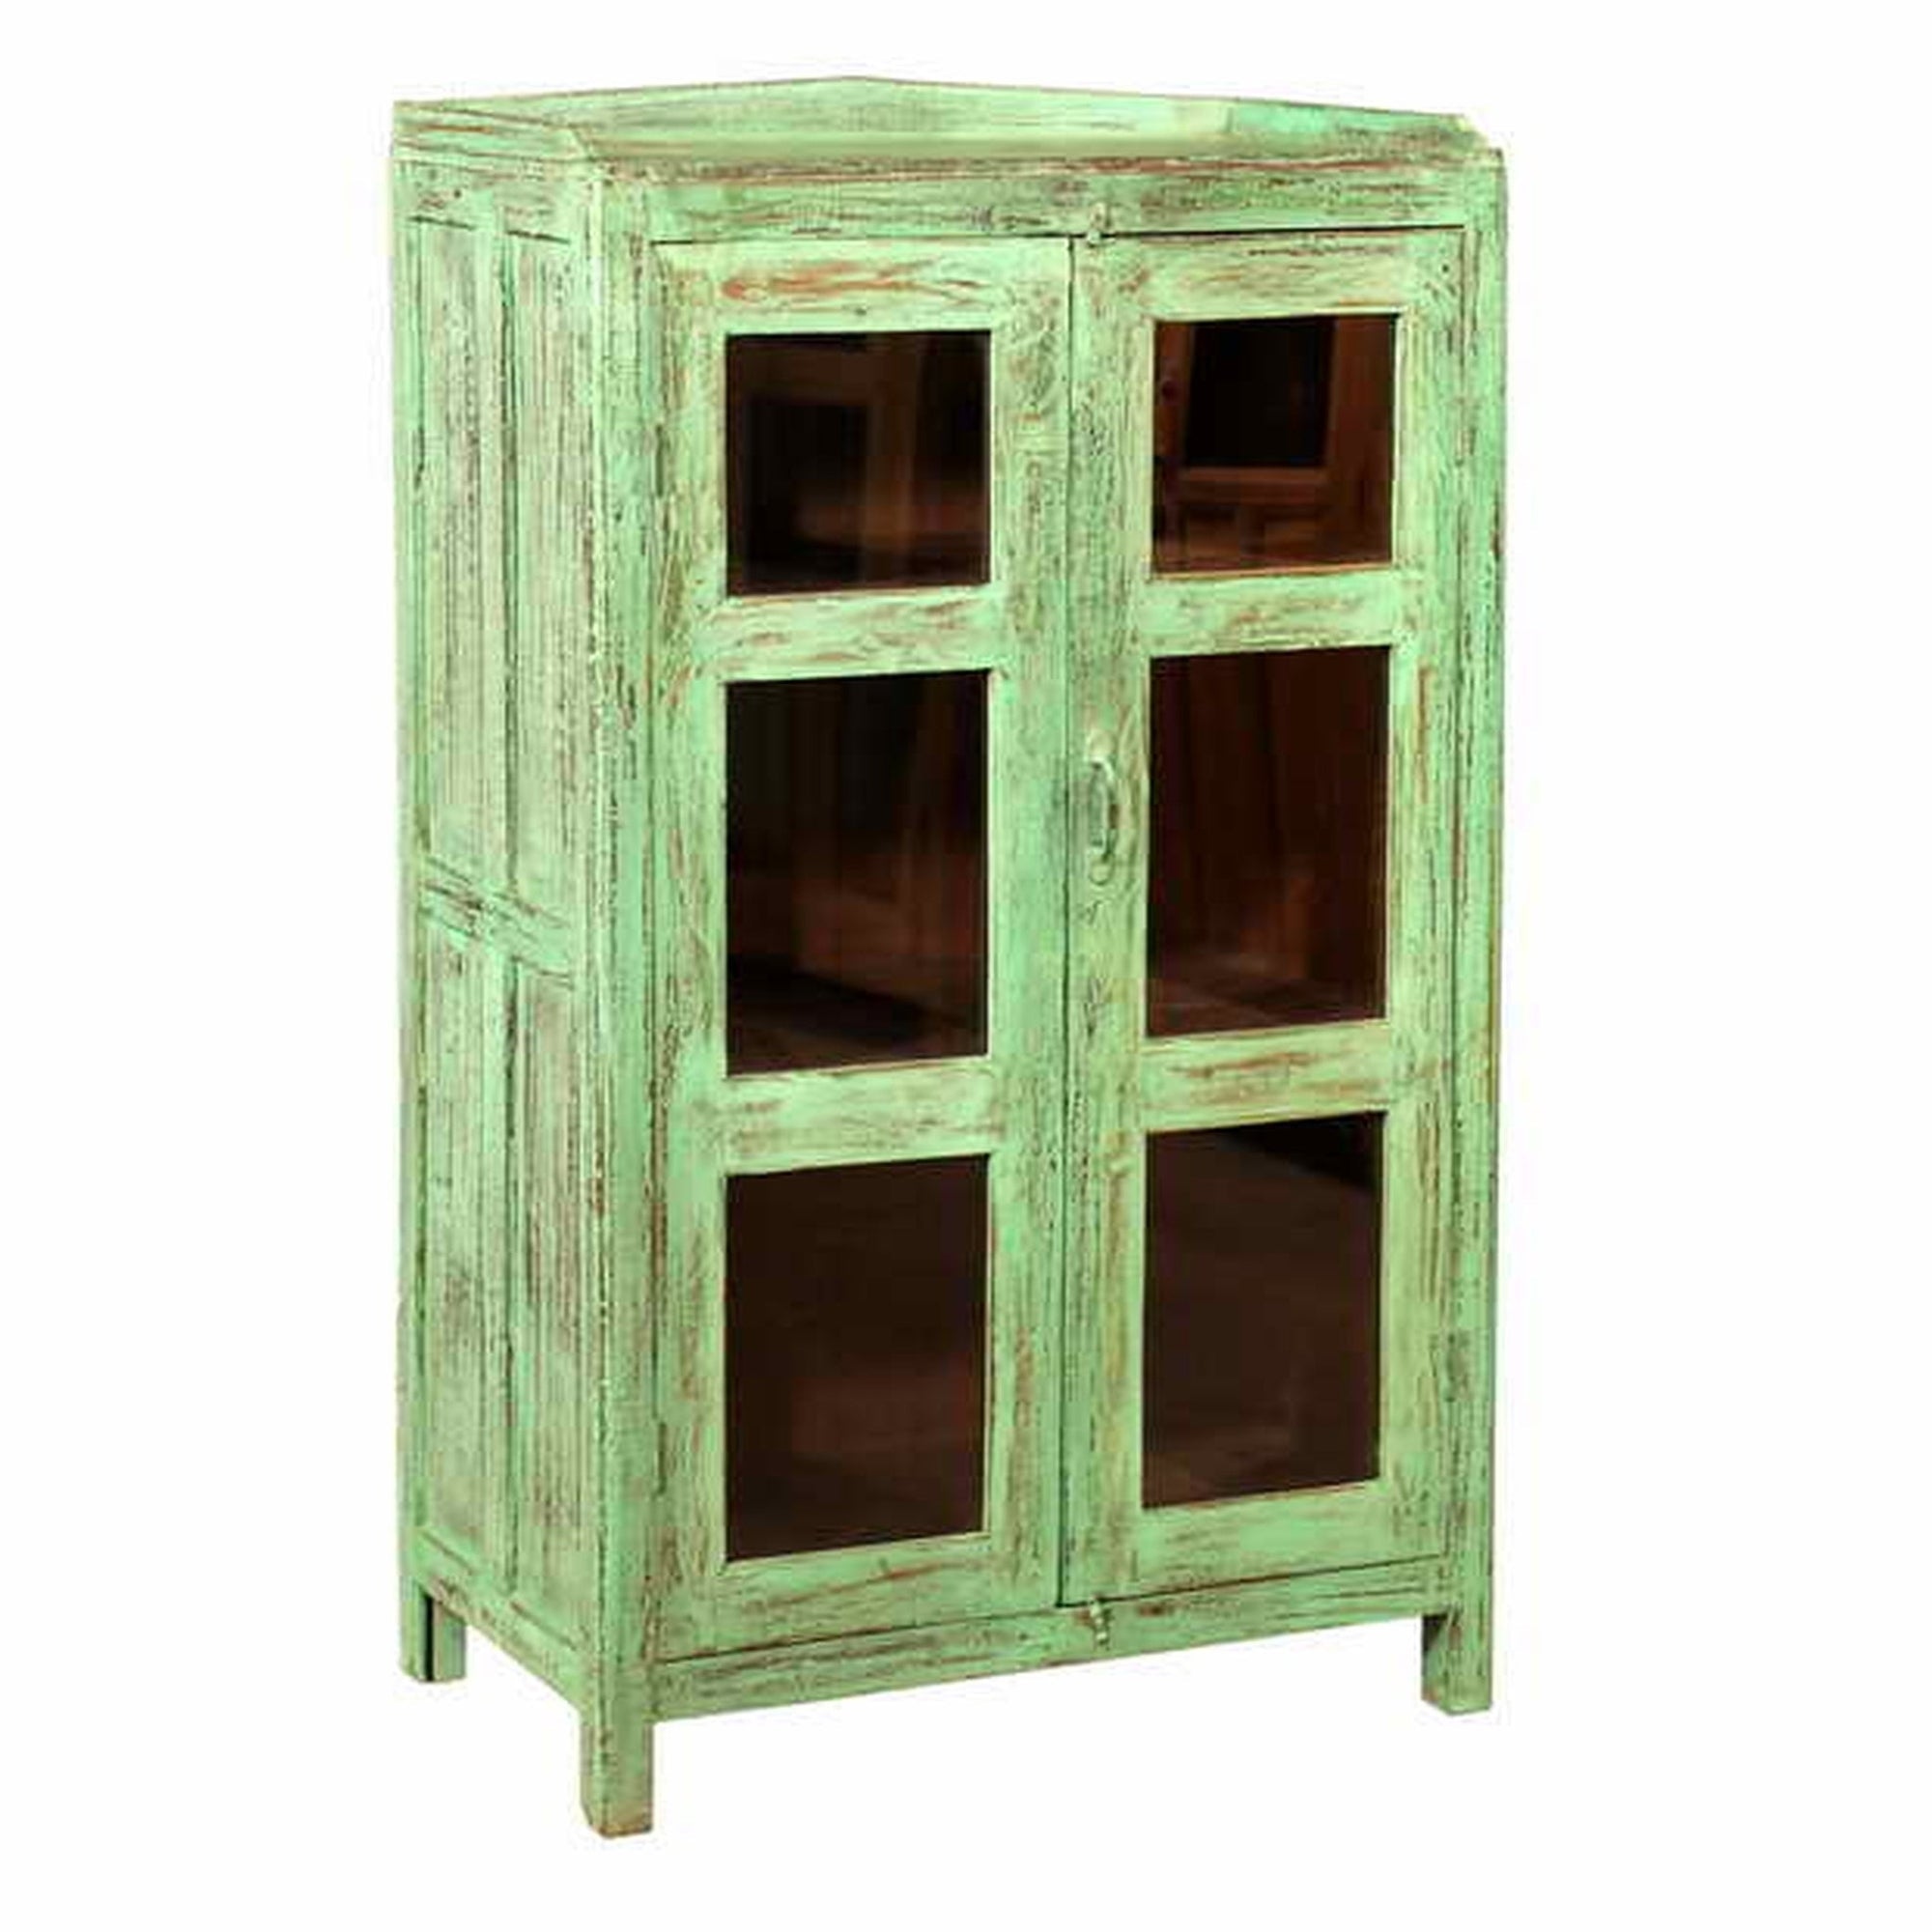 RM-054093, Wooden Cabinet With Glass, Teak, 50+Yrs Old - iDekor8